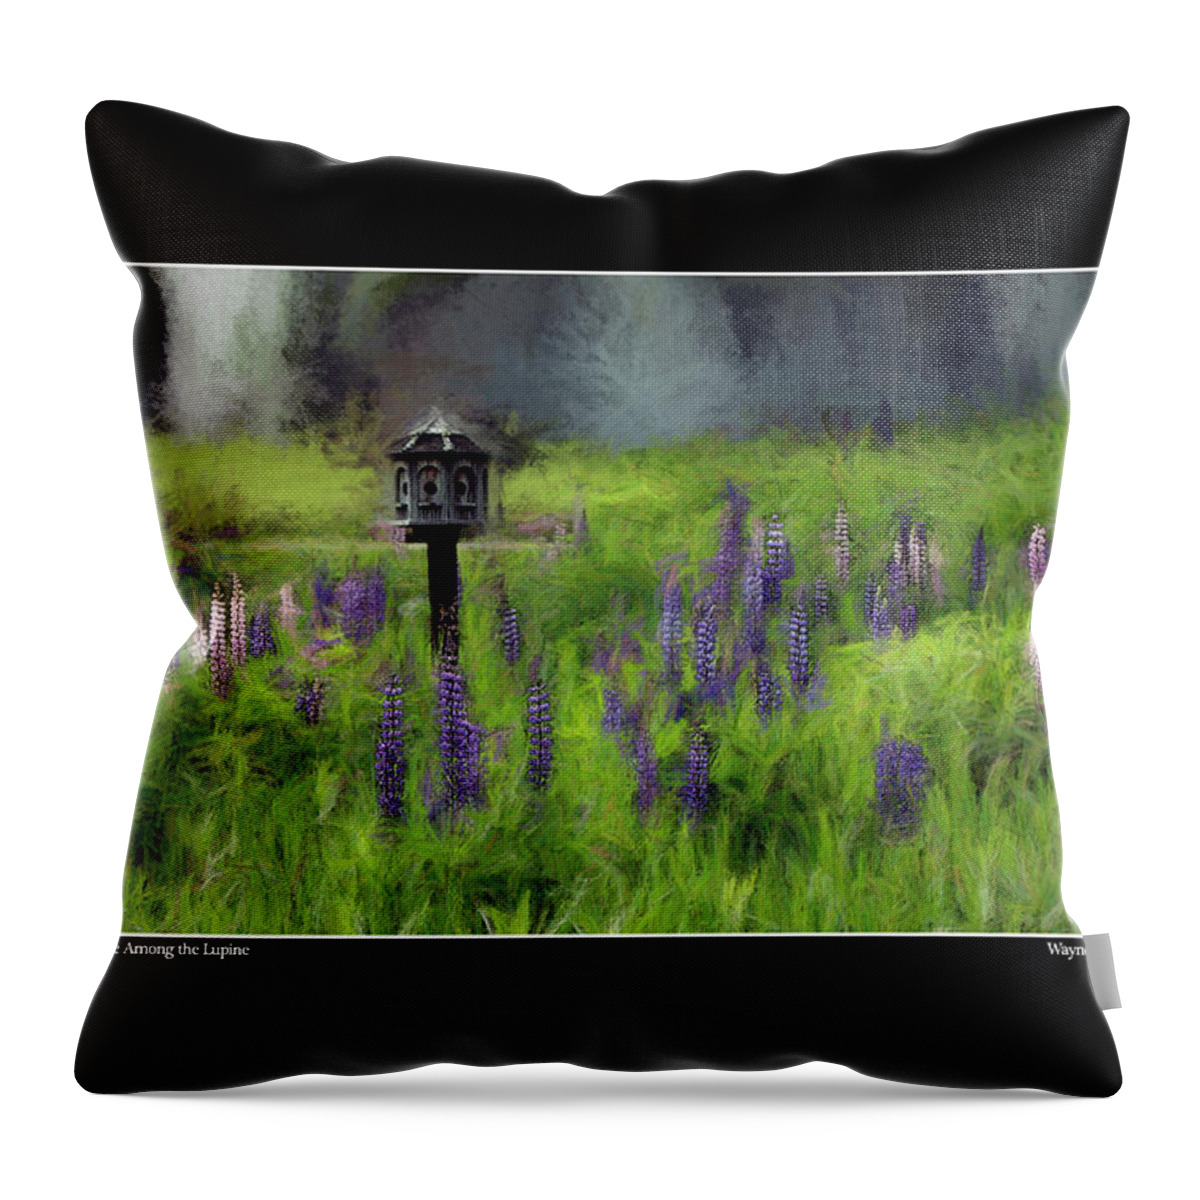 Lupinefest Throw Pillow featuring the photograph A Home Among the Lupine Redux Poster by Wayne King